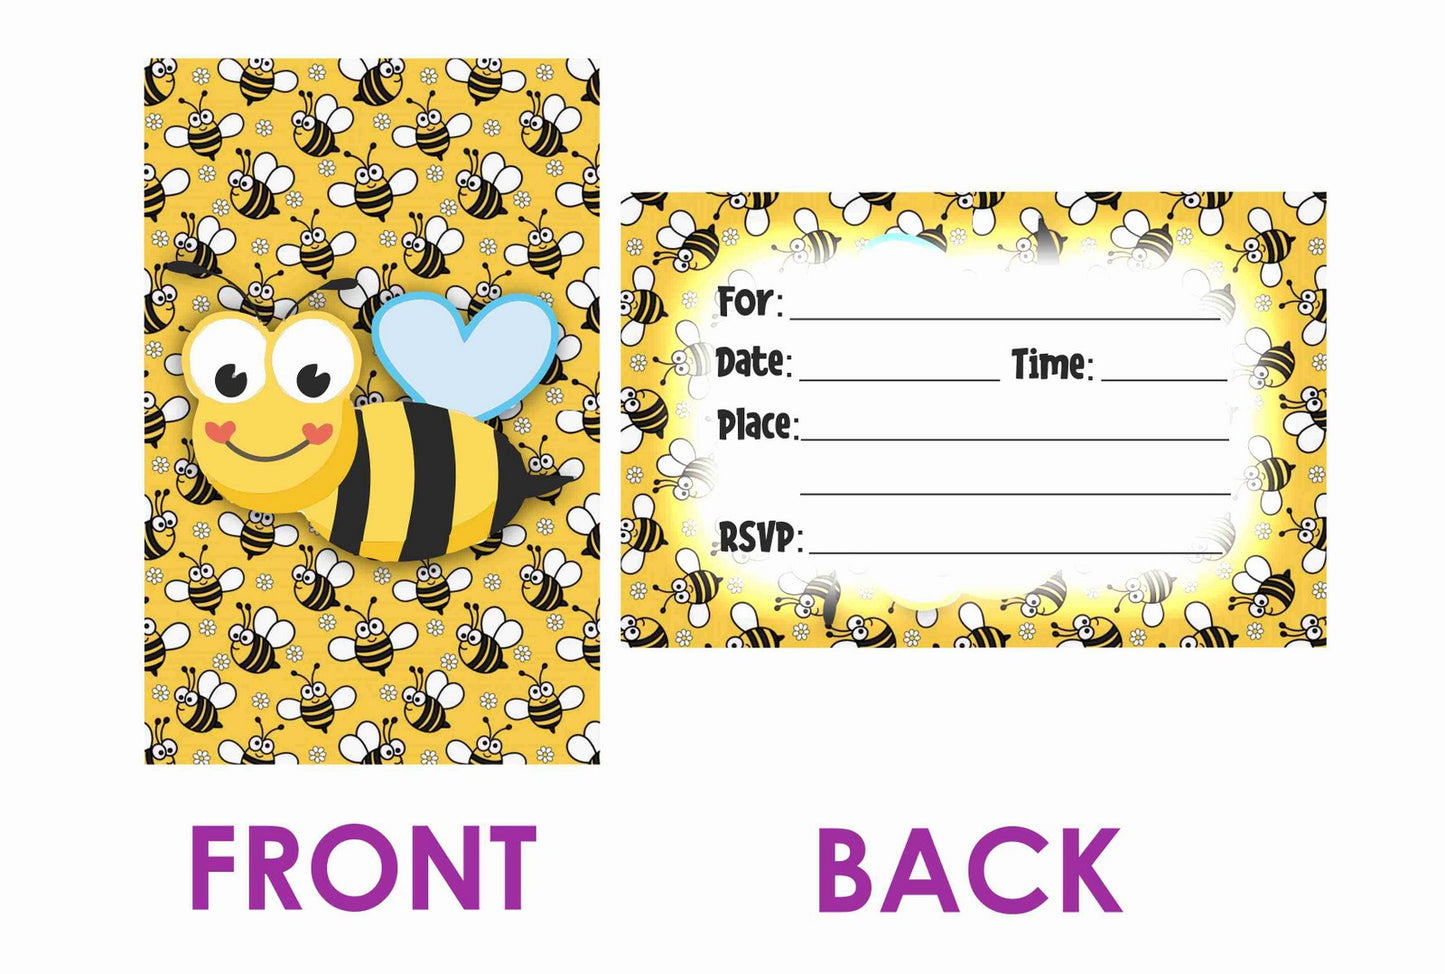 Honey Bee Theme Children's Birthday Party Invitations Cards with Envelopes - Kids Birthday Party Invitations for Boys or Girls,- Invitation Cards (Pack of 10)